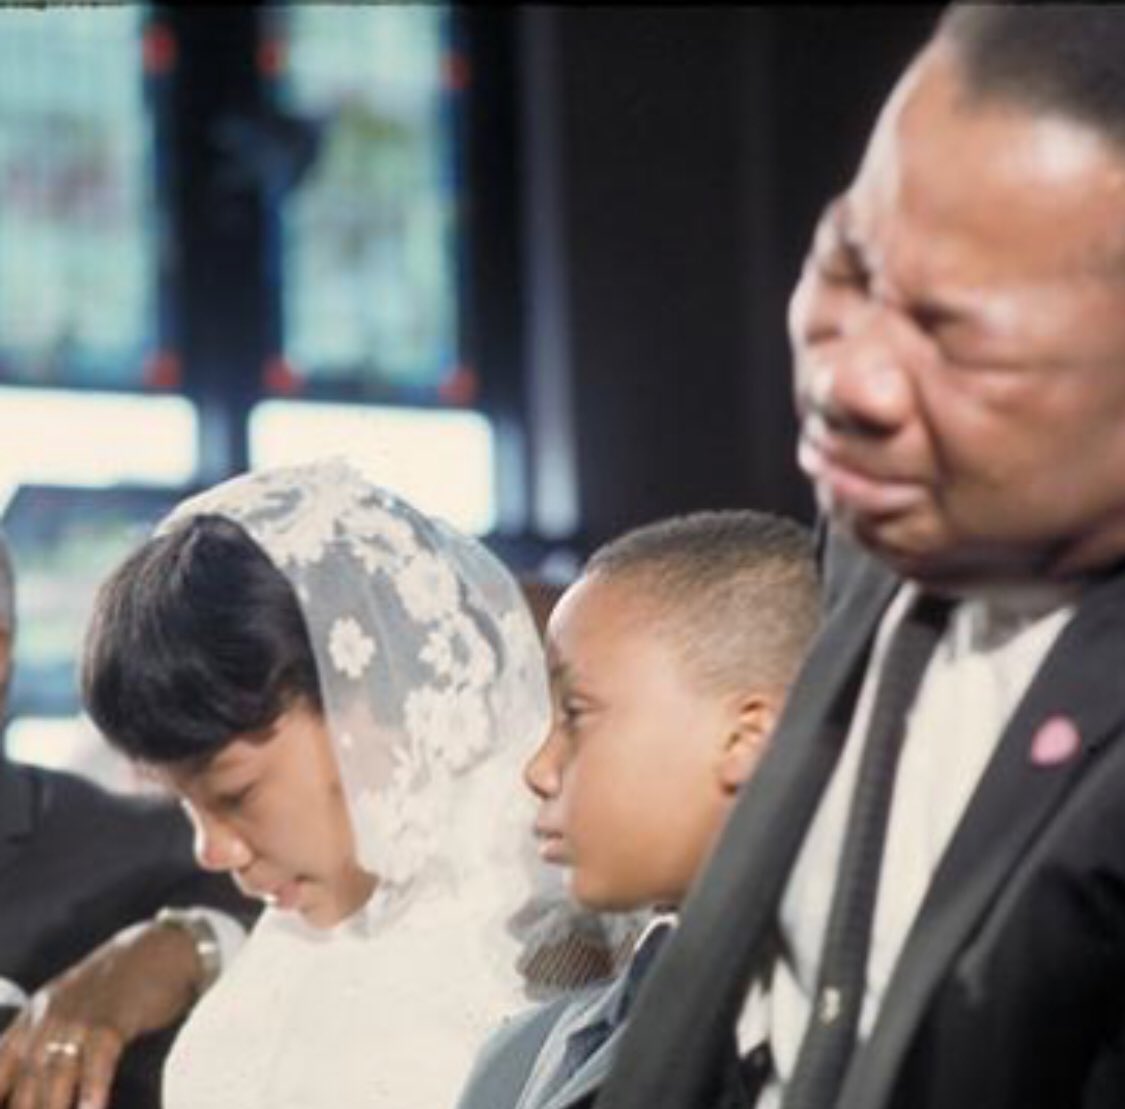 A grieving brother. My uncle, Reverend A.D. King, with my brother, Martin III, and sister, Yolanda, at the funeral service for my father at Ebenezer Baptist Church.  #MLK